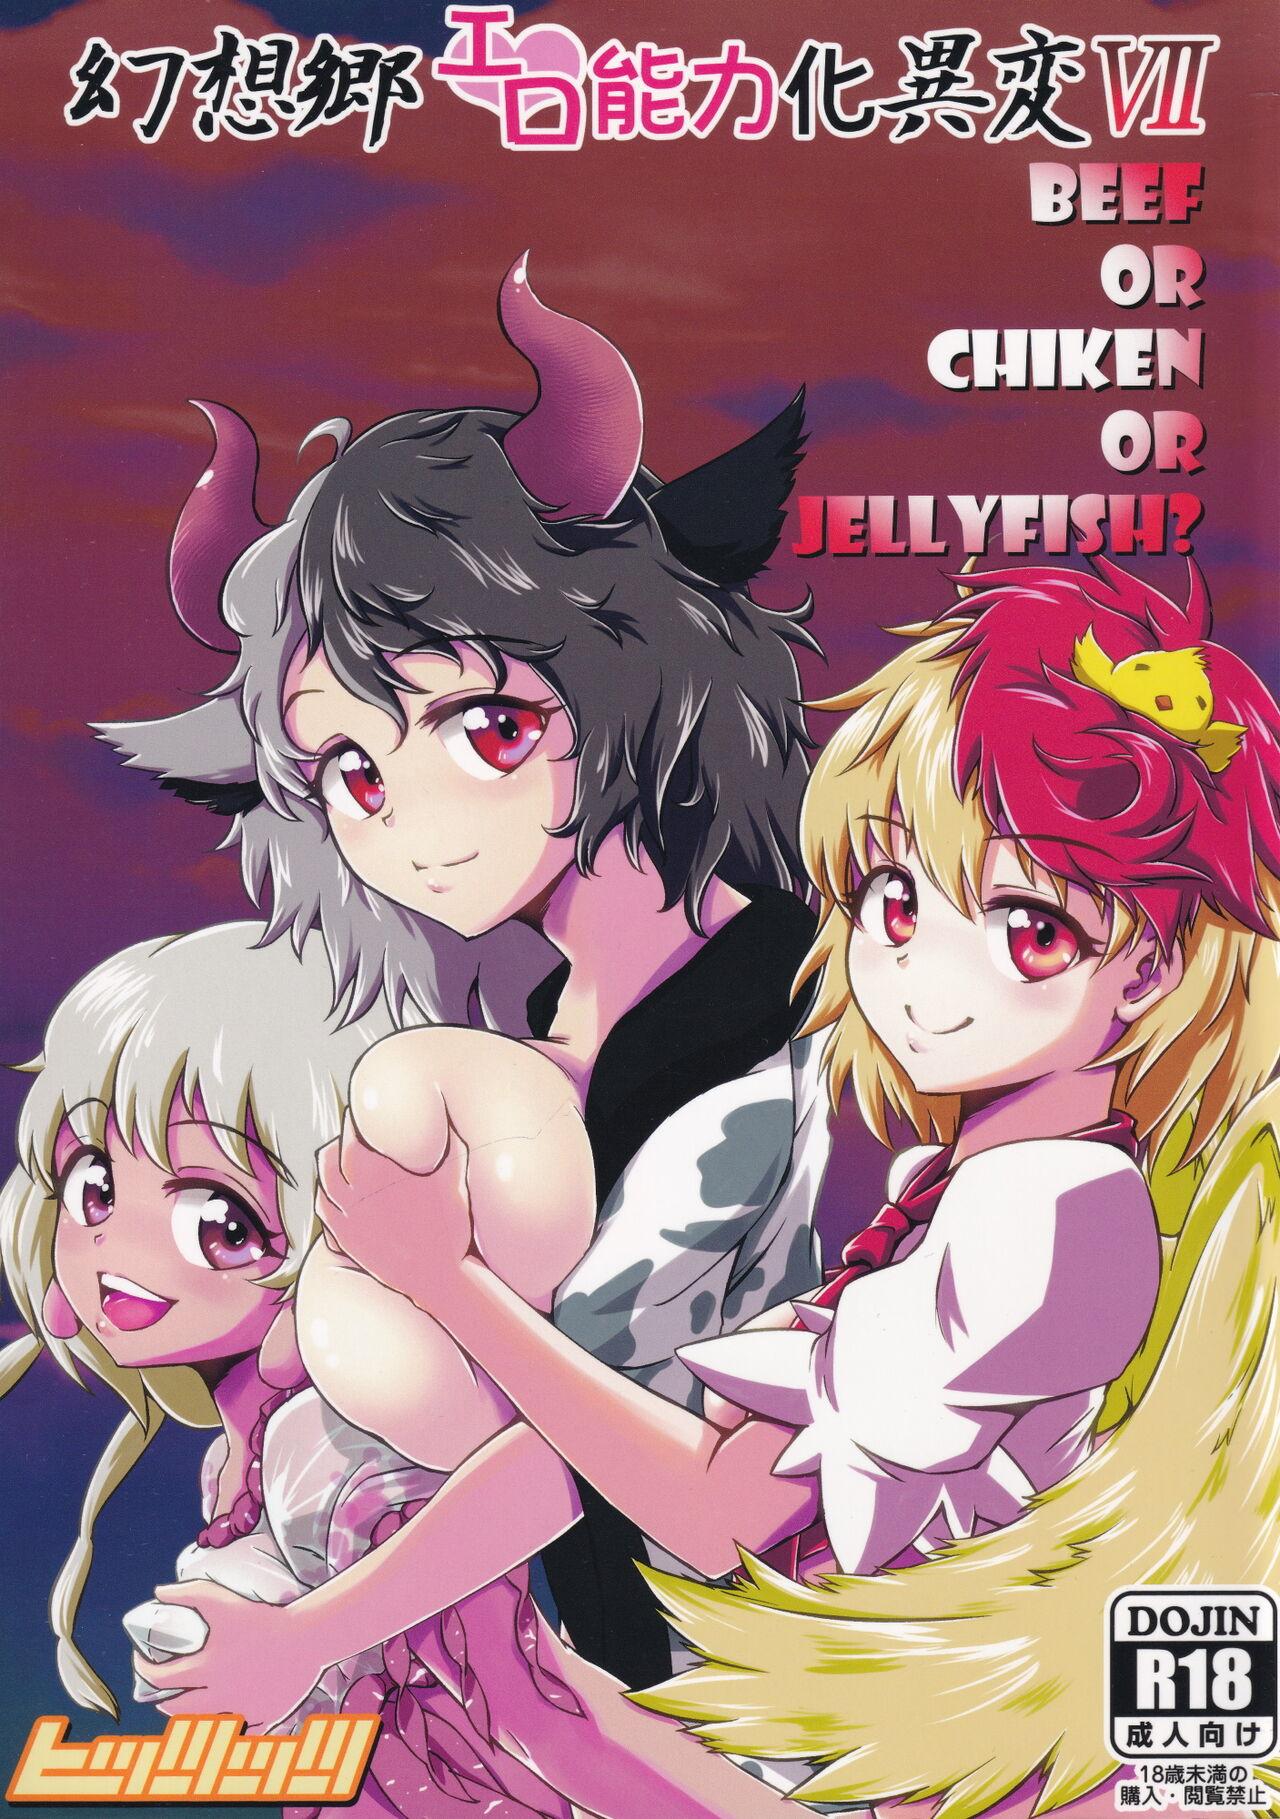 Culote Gensoukyou Ero Nouryoku-ka Ihen VII Beef or Chicken or Jellyfish? - Touhou project Eng Sub - Page 1